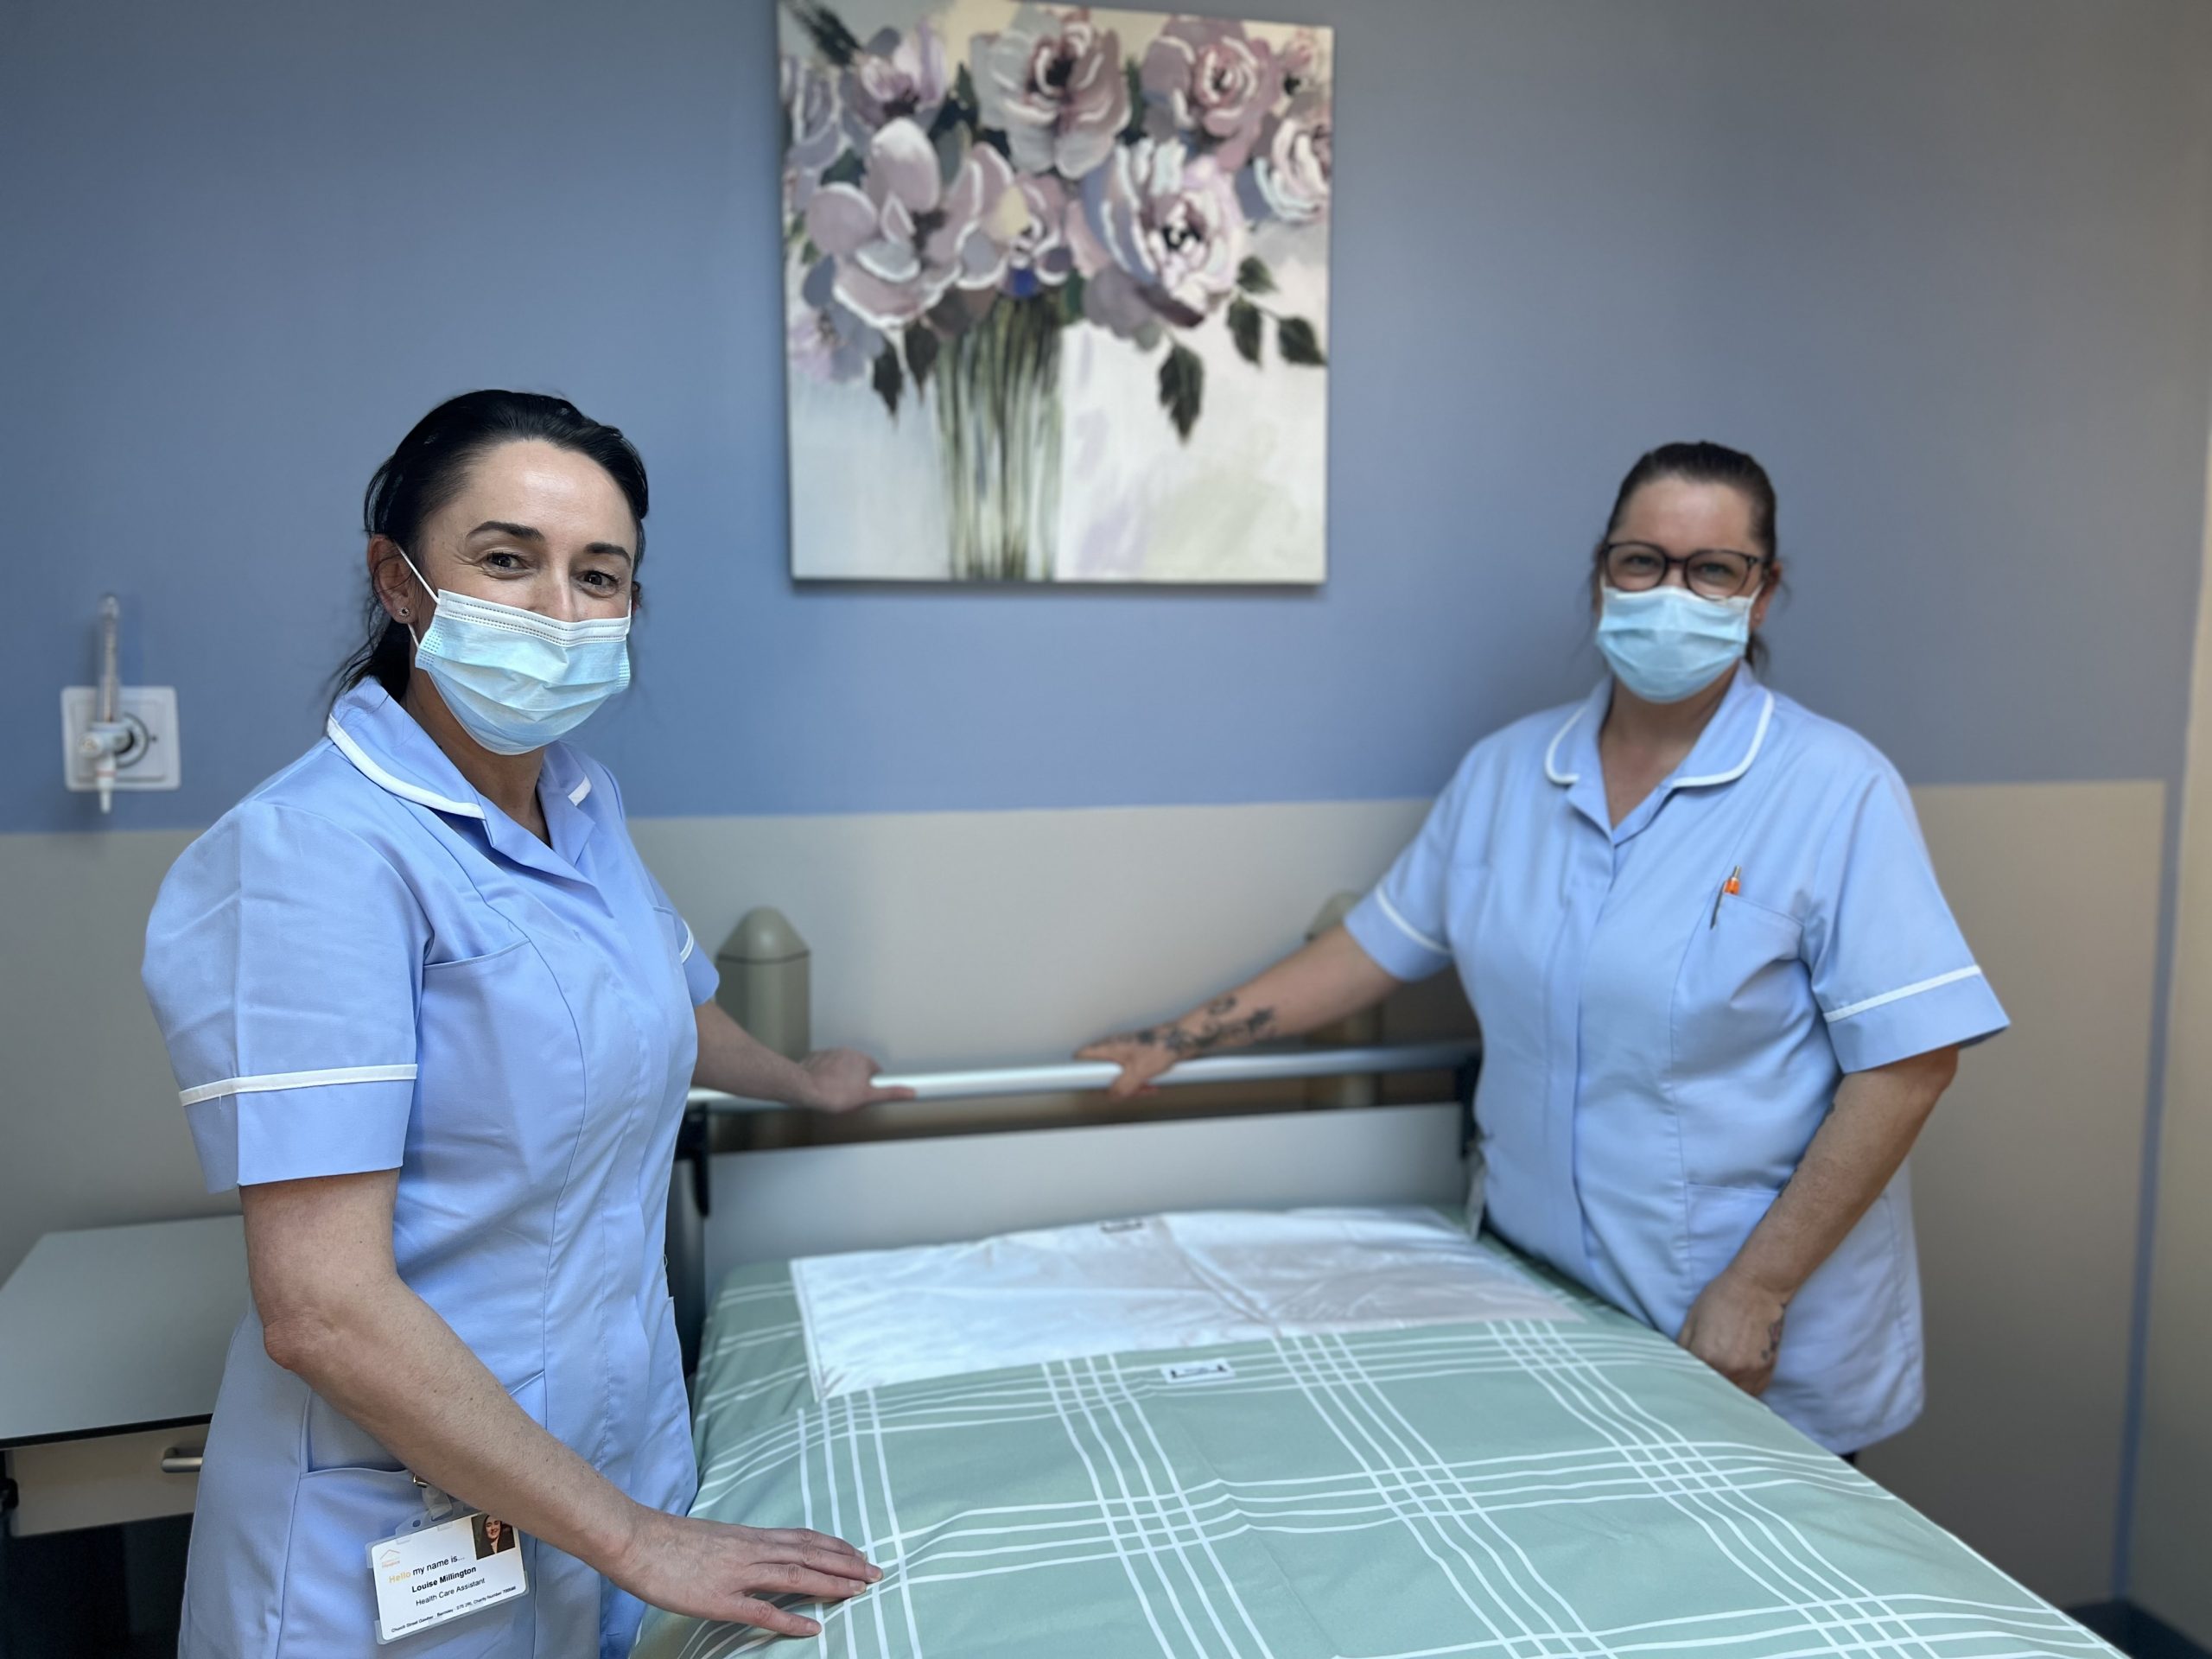 Two healthcare assistants making a bed on the inpatient unit. The bedding is light green and there is a picture of pink flowers on the wall behind. The two members of staff are smiling and are dressed in light blue uniform. They are wearing face masks.